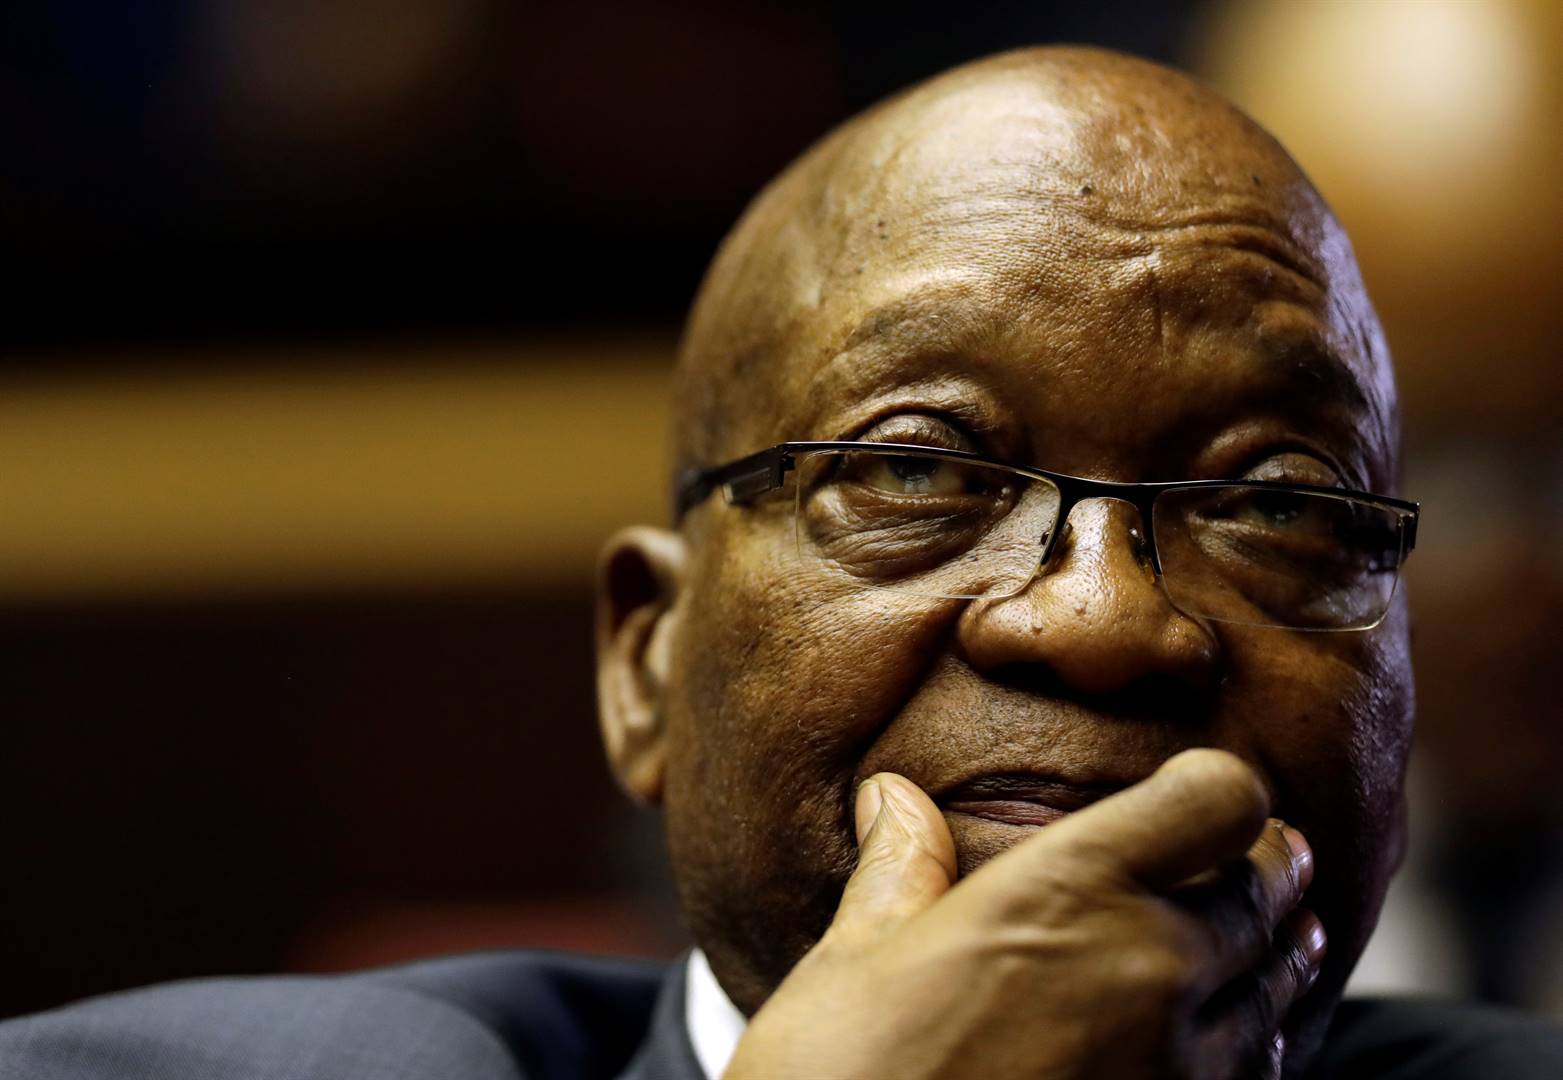 Former president Jacob Zuma sits in court during a break while facing charges that include fraud‚ corruption and racketeering in Pietermaritzburg. Picture: Themba Hadebe/Reuters